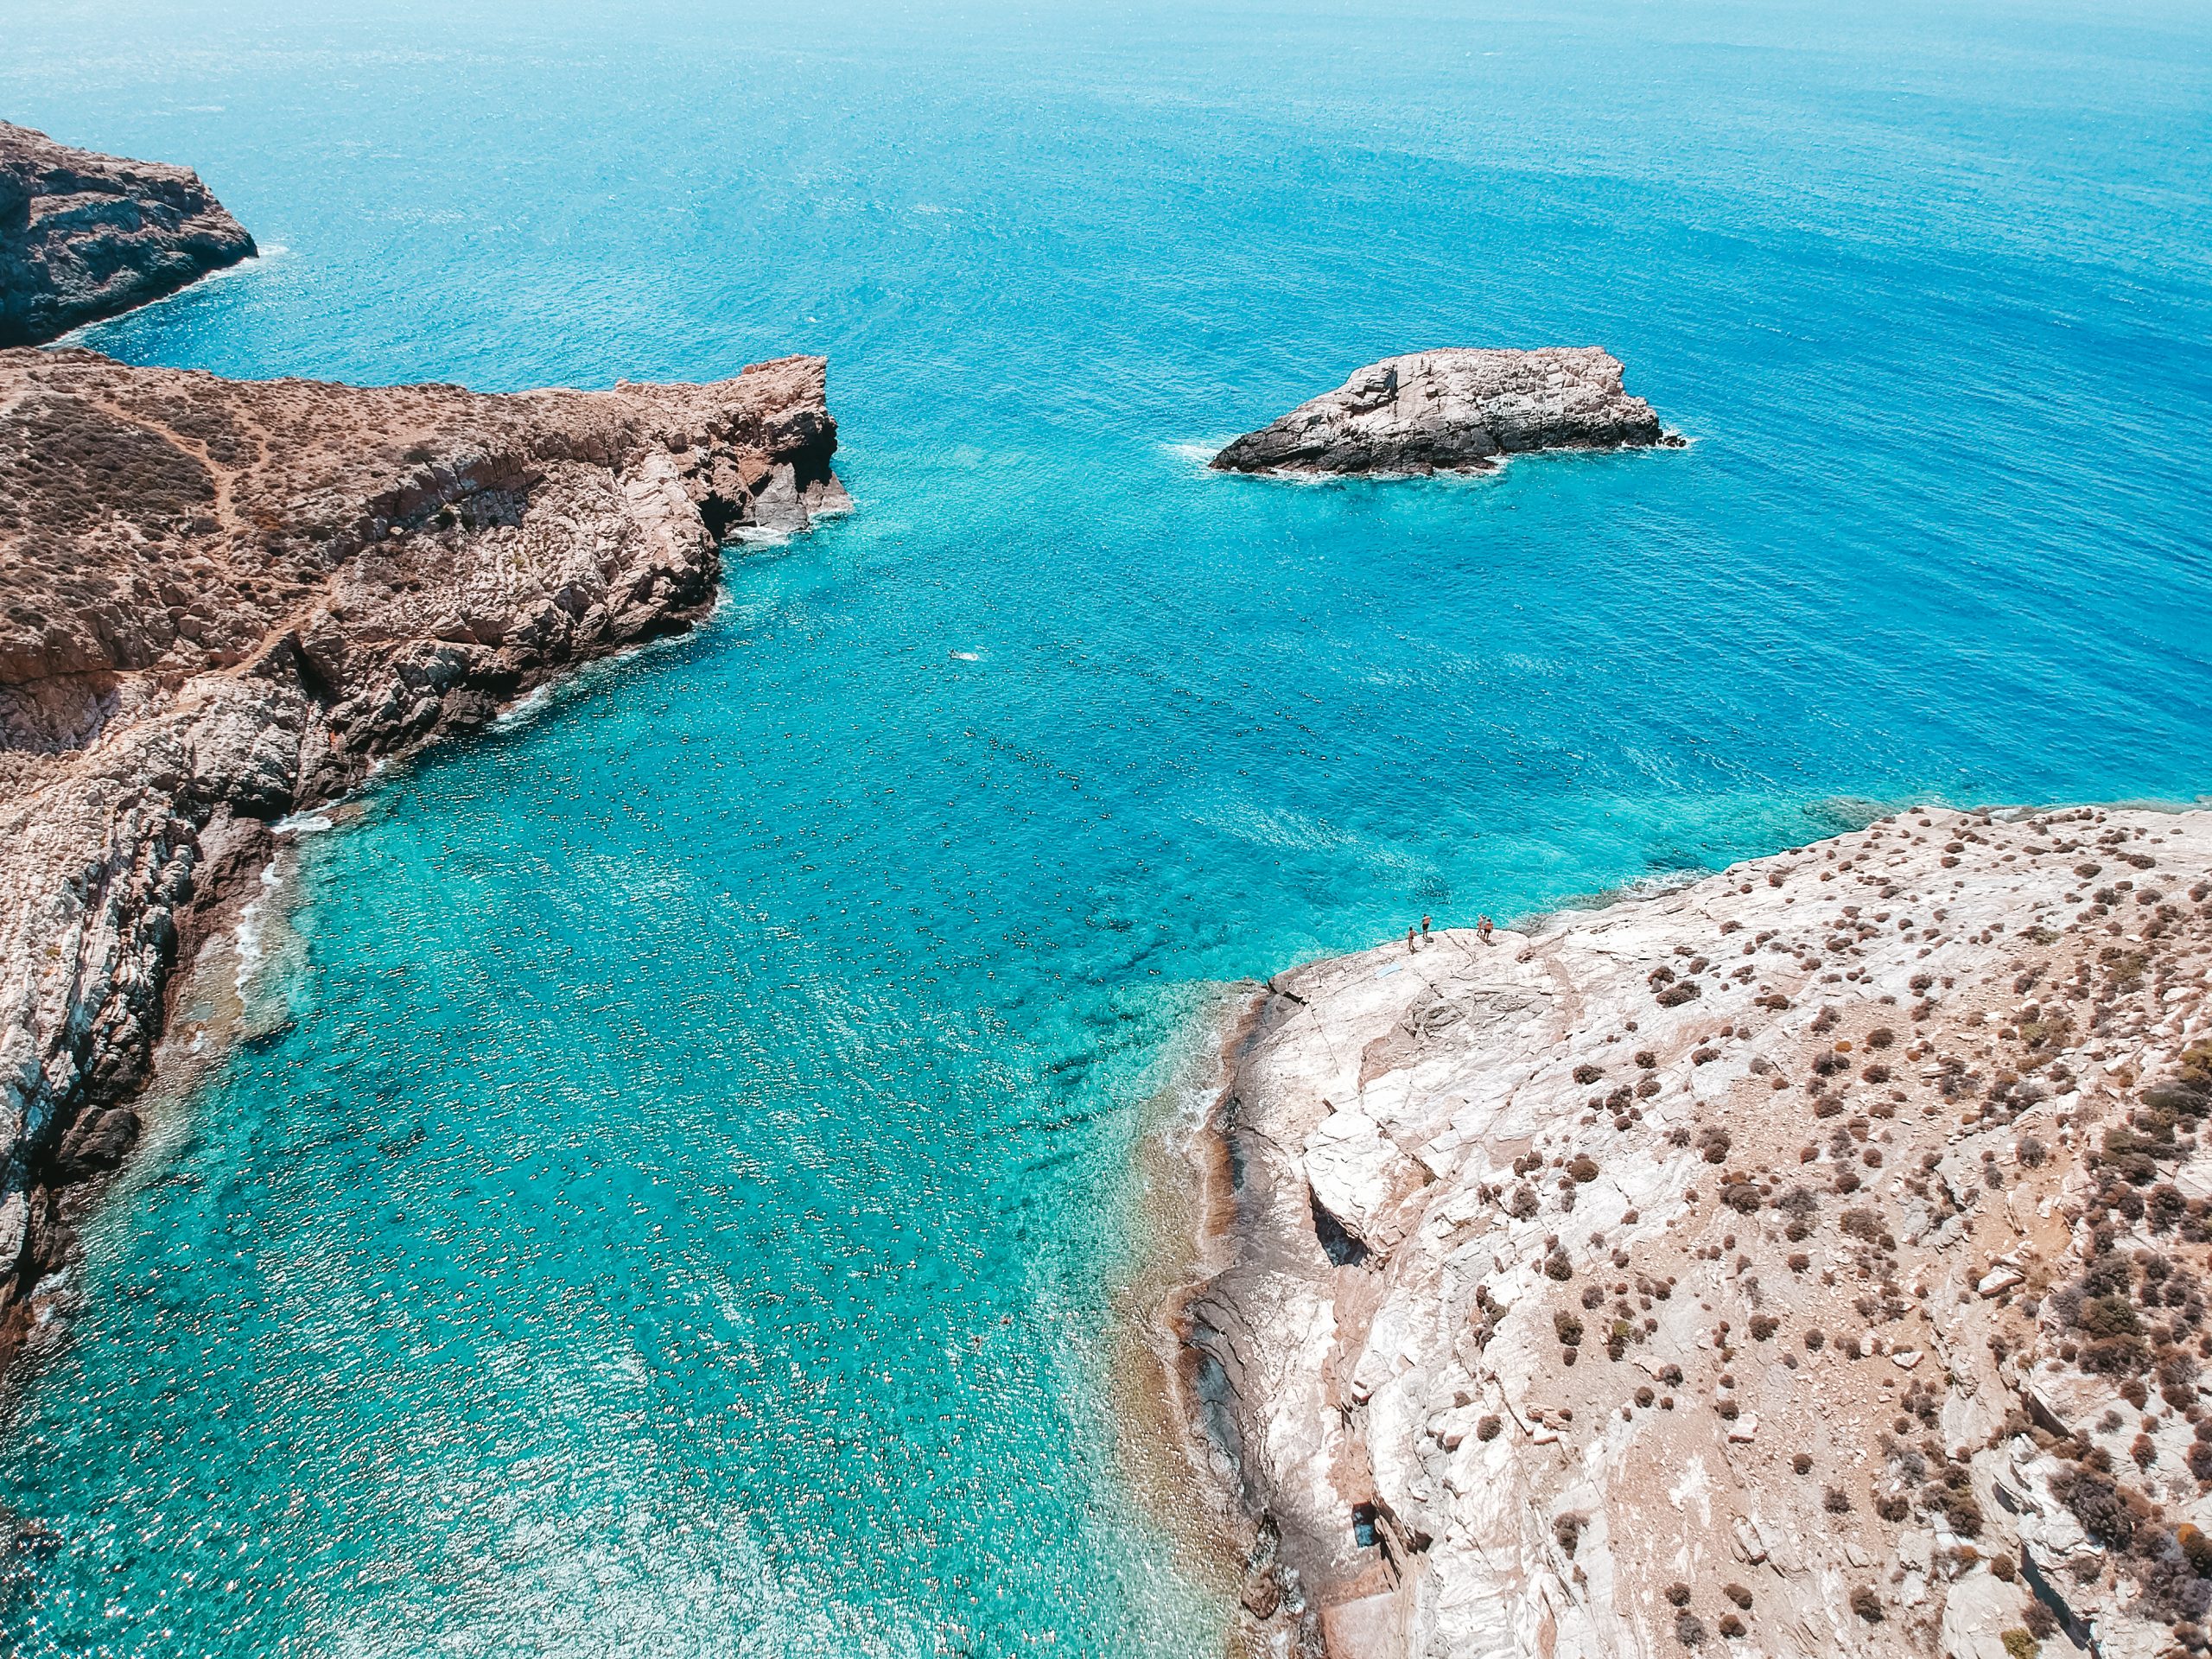 Livadaki beach from above. Turquoise waters and rocks. Best beaches in Folegandros